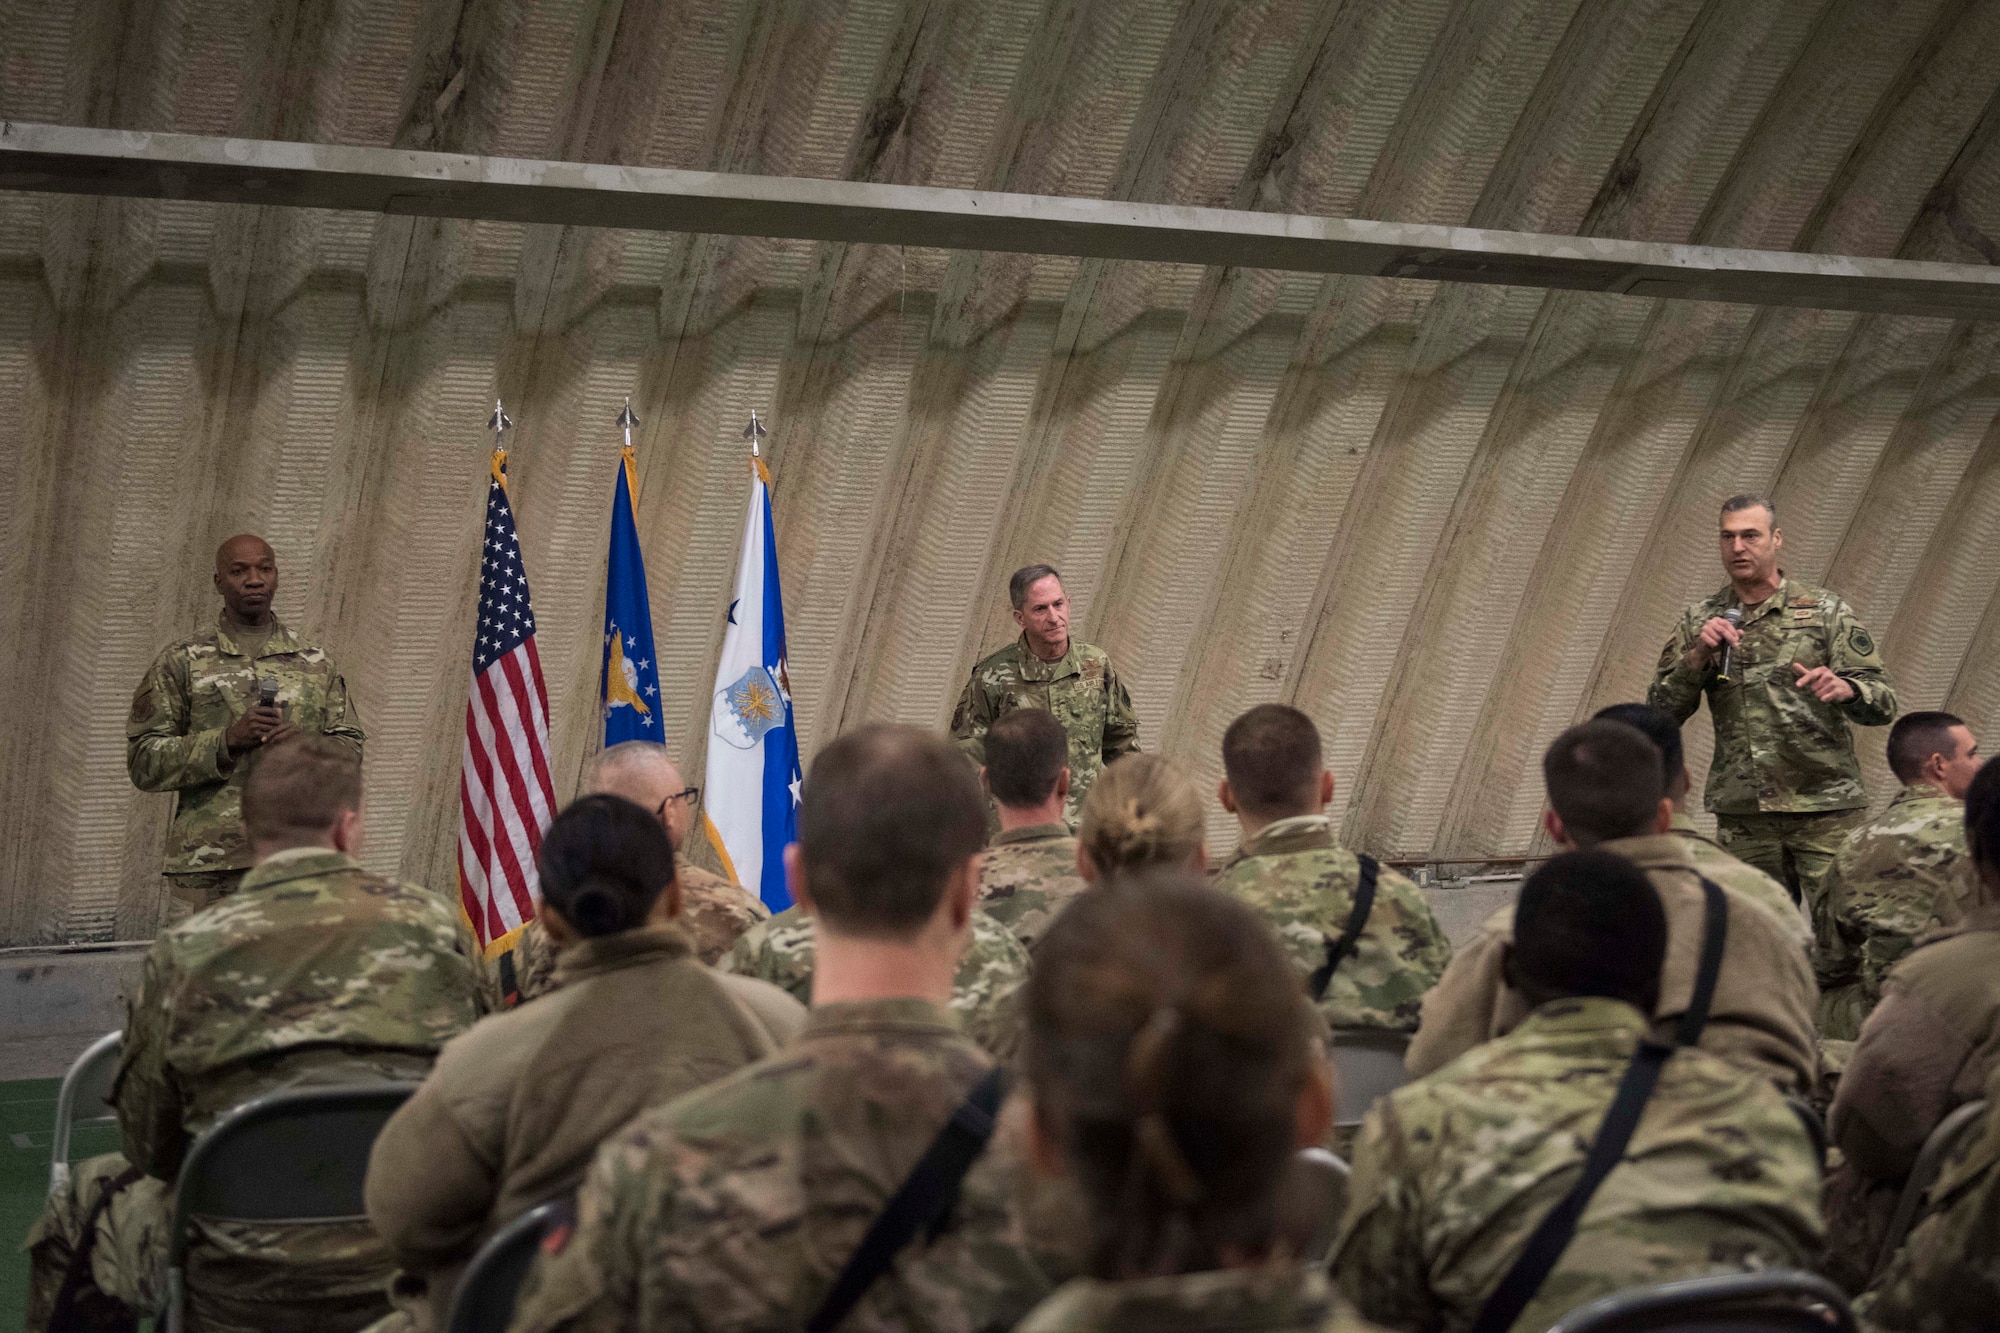 Lt. Gen. Joseph Guastella, U.S. Air Forces Central Command commander, answers a question during a 455th Air Expeditionary Wing “all call” at Bagram Airfield, Afghanistan, Dec. 25, 2018. Guastella traveled to Afghanistan with Air Force Chief of Staff Gen. David L. Goldfein and Chief Master Sgt. of the Air Force Kaleth O. Wright, who discussed recent and upcoming changes in the Air Force to empower Airmen to be more resilient and effective. (U.S. Air Force photo by Senior Airman Kaylee Dubois)